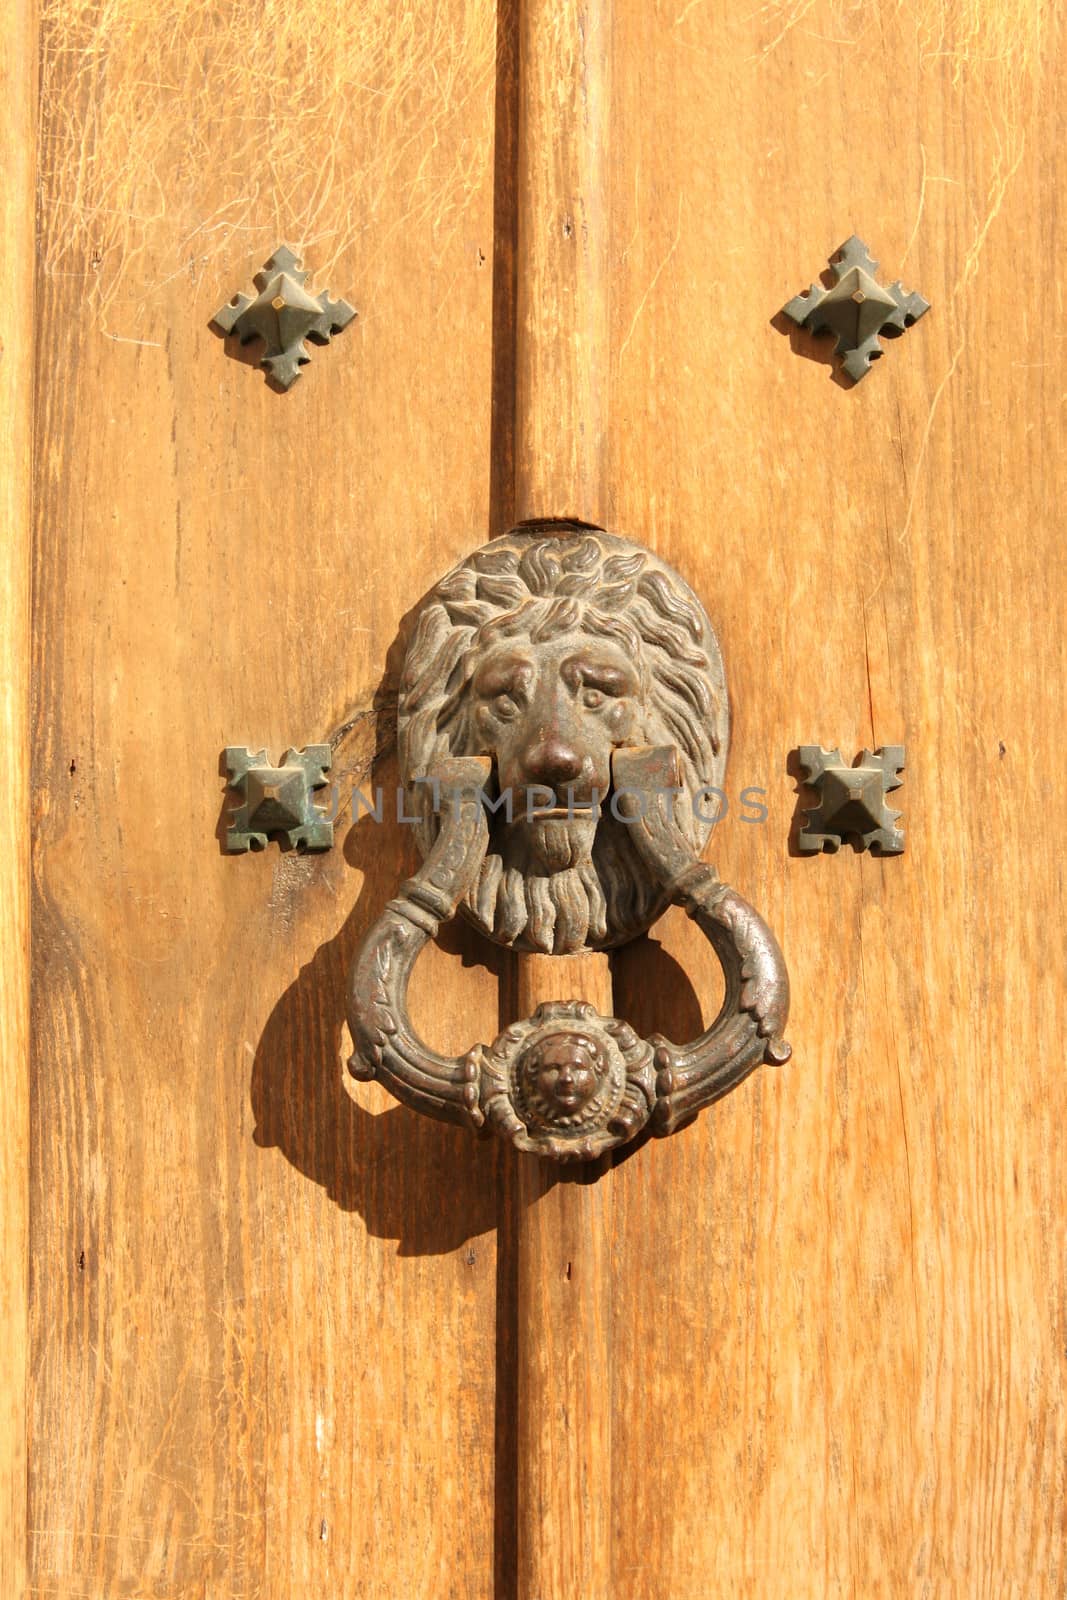 Antique handle with lion head by frenta